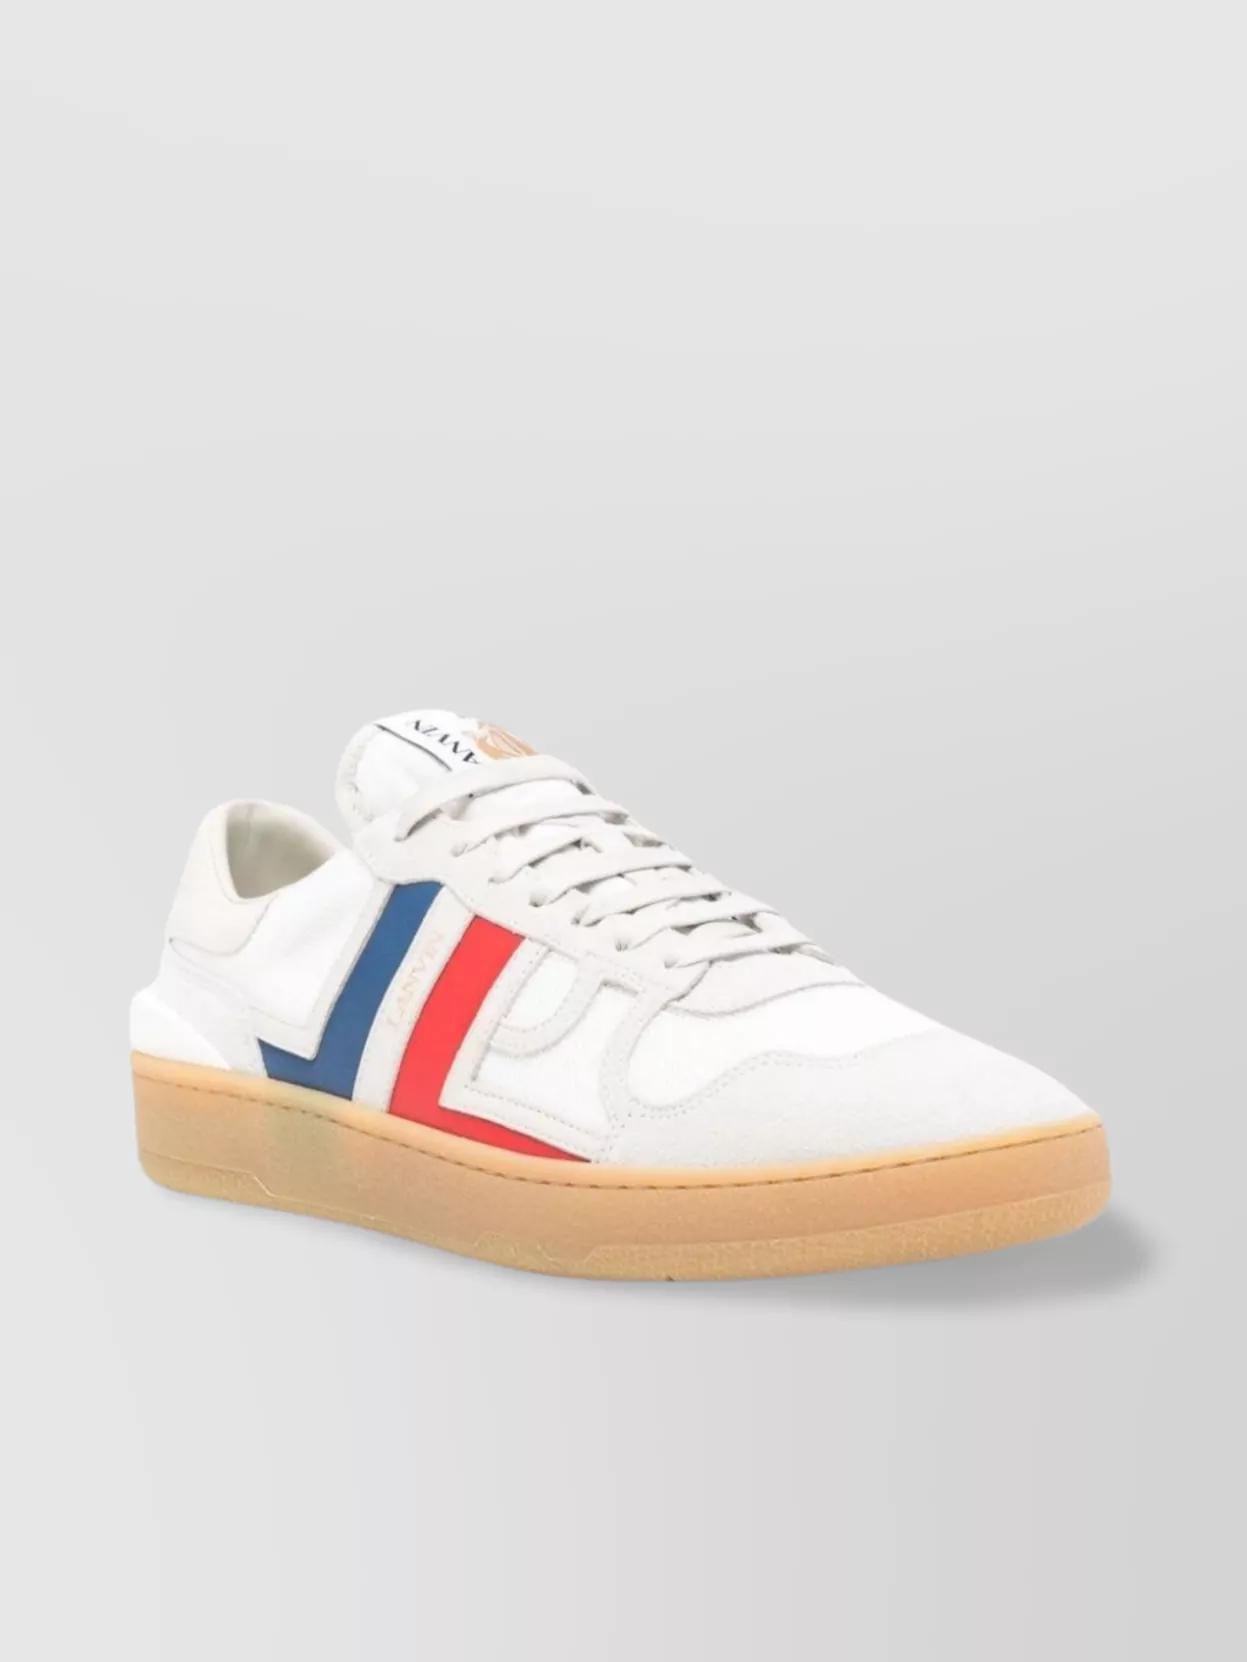 Shop Lanvin Rubber Sole Leather Mesh Panelled Suede Sneakers